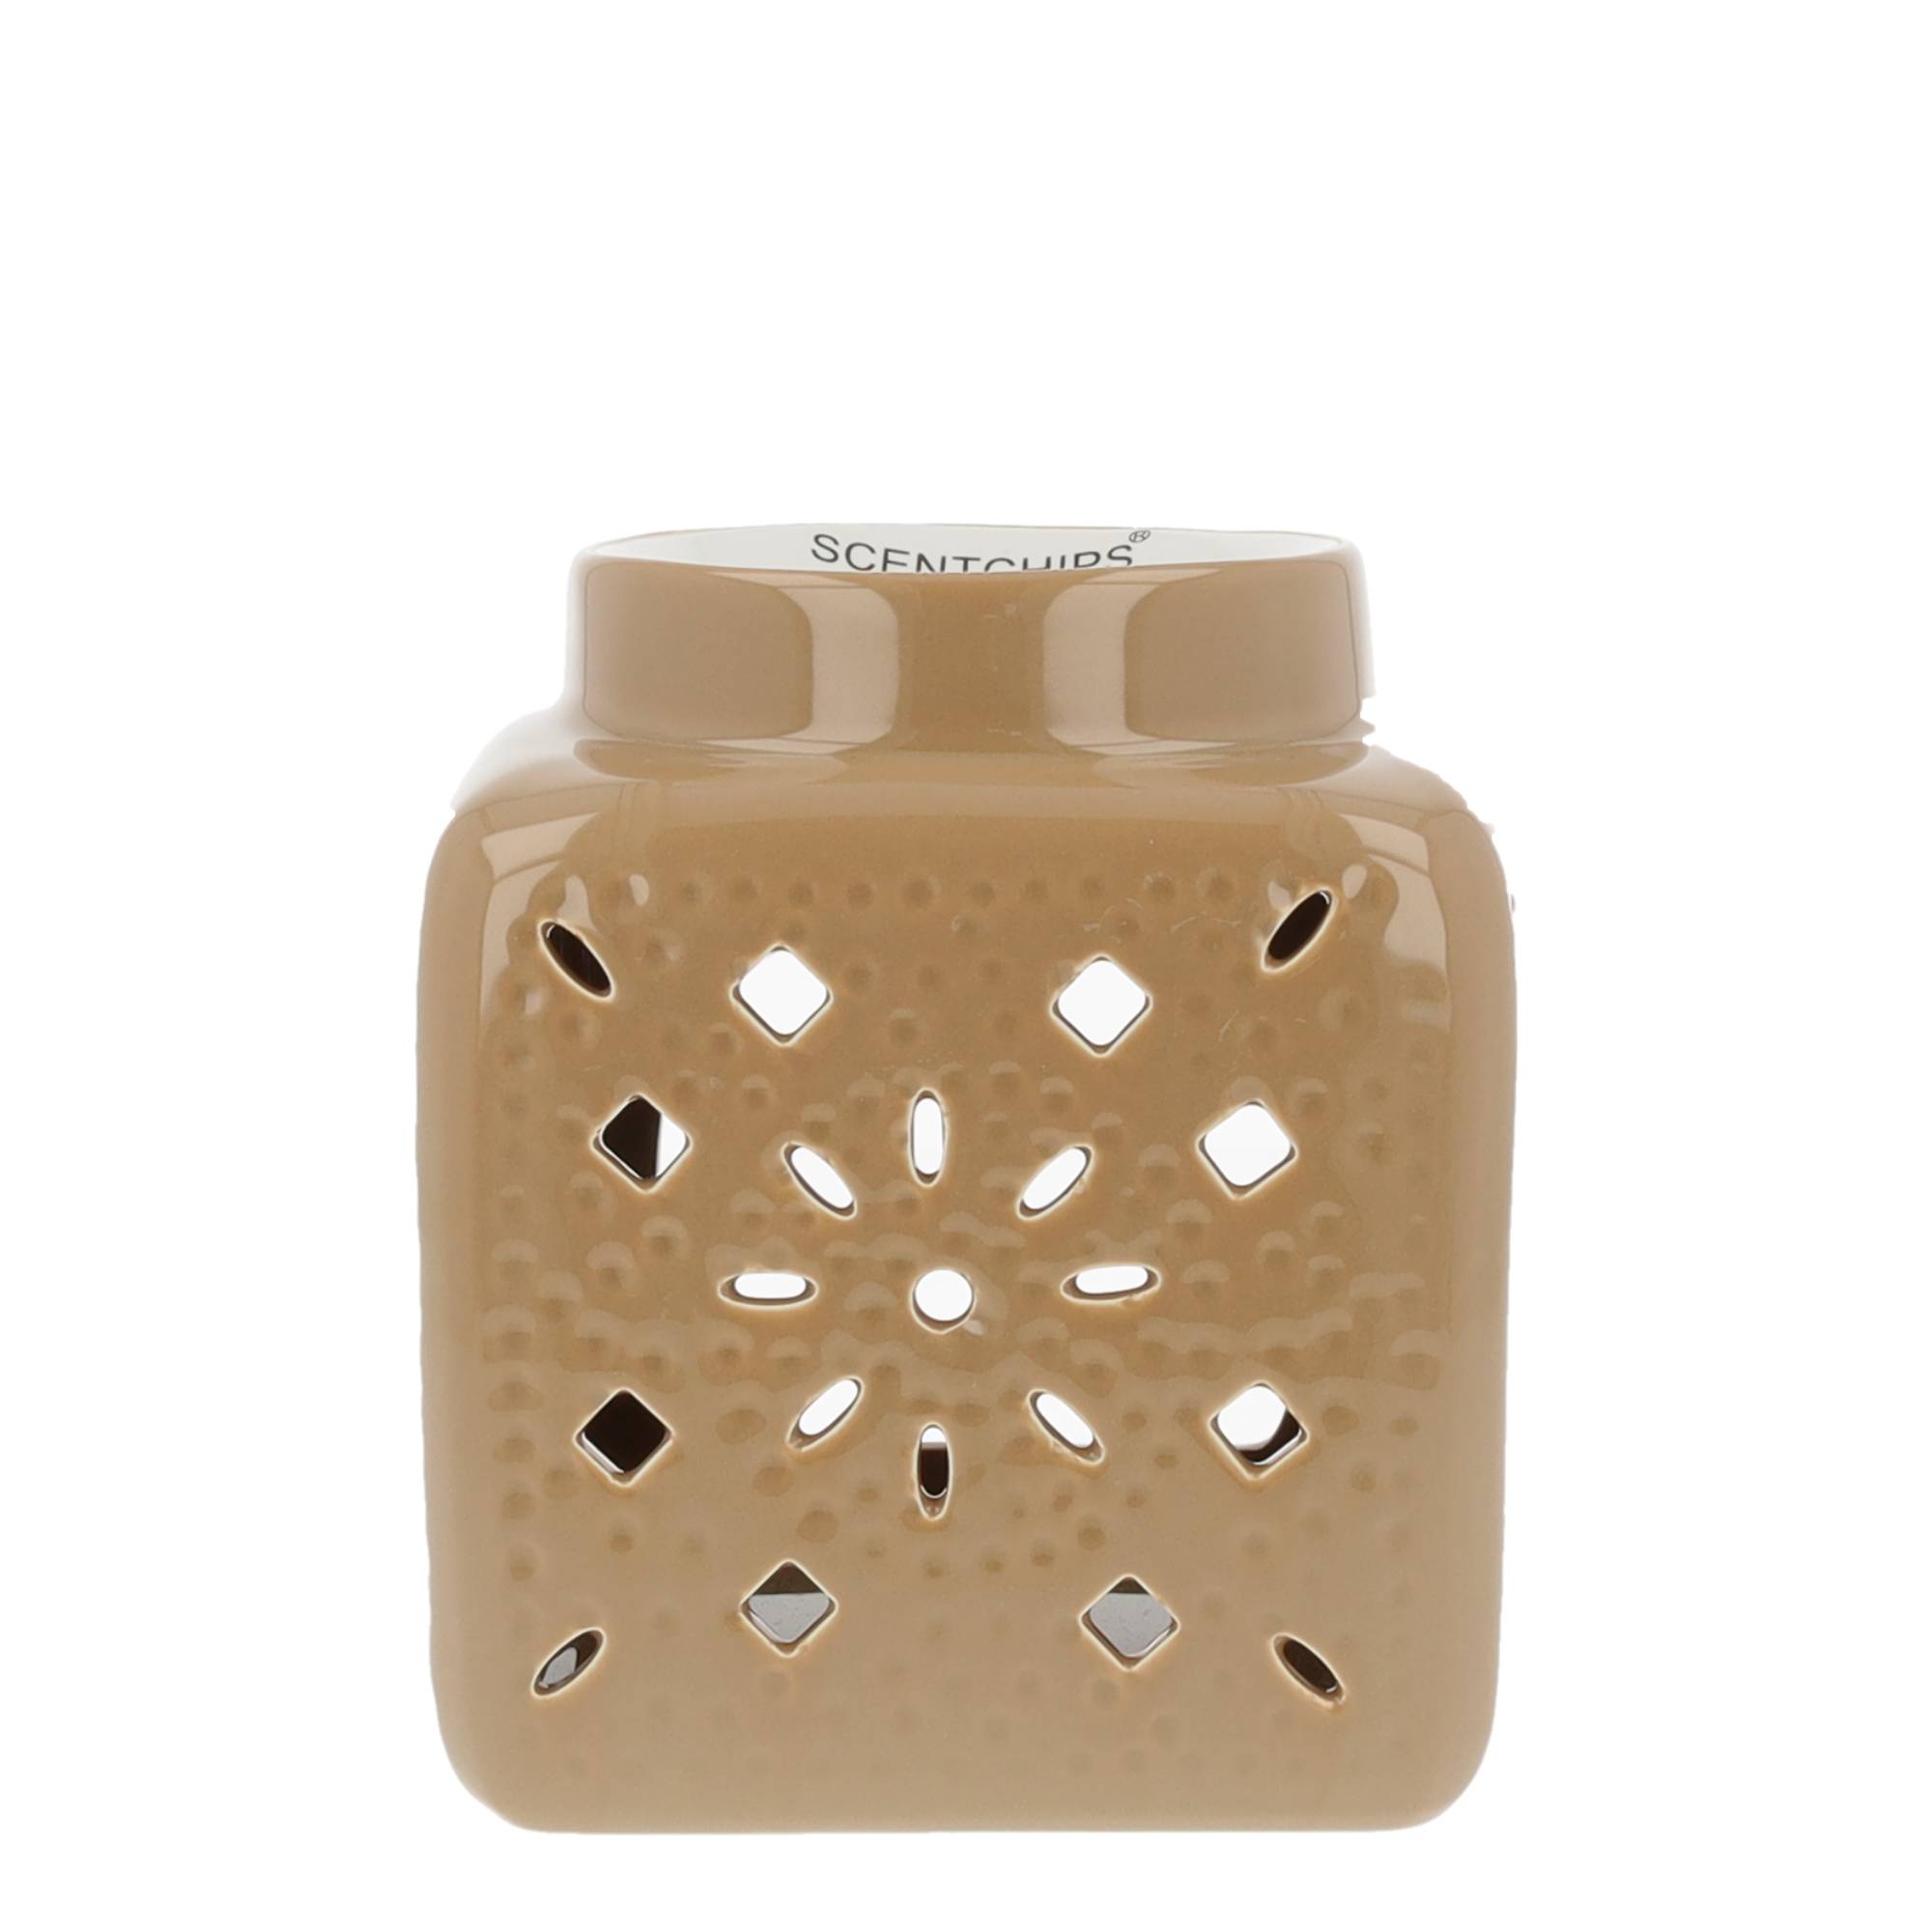 Scentchips® Square Cut Out Brown scented wax burner